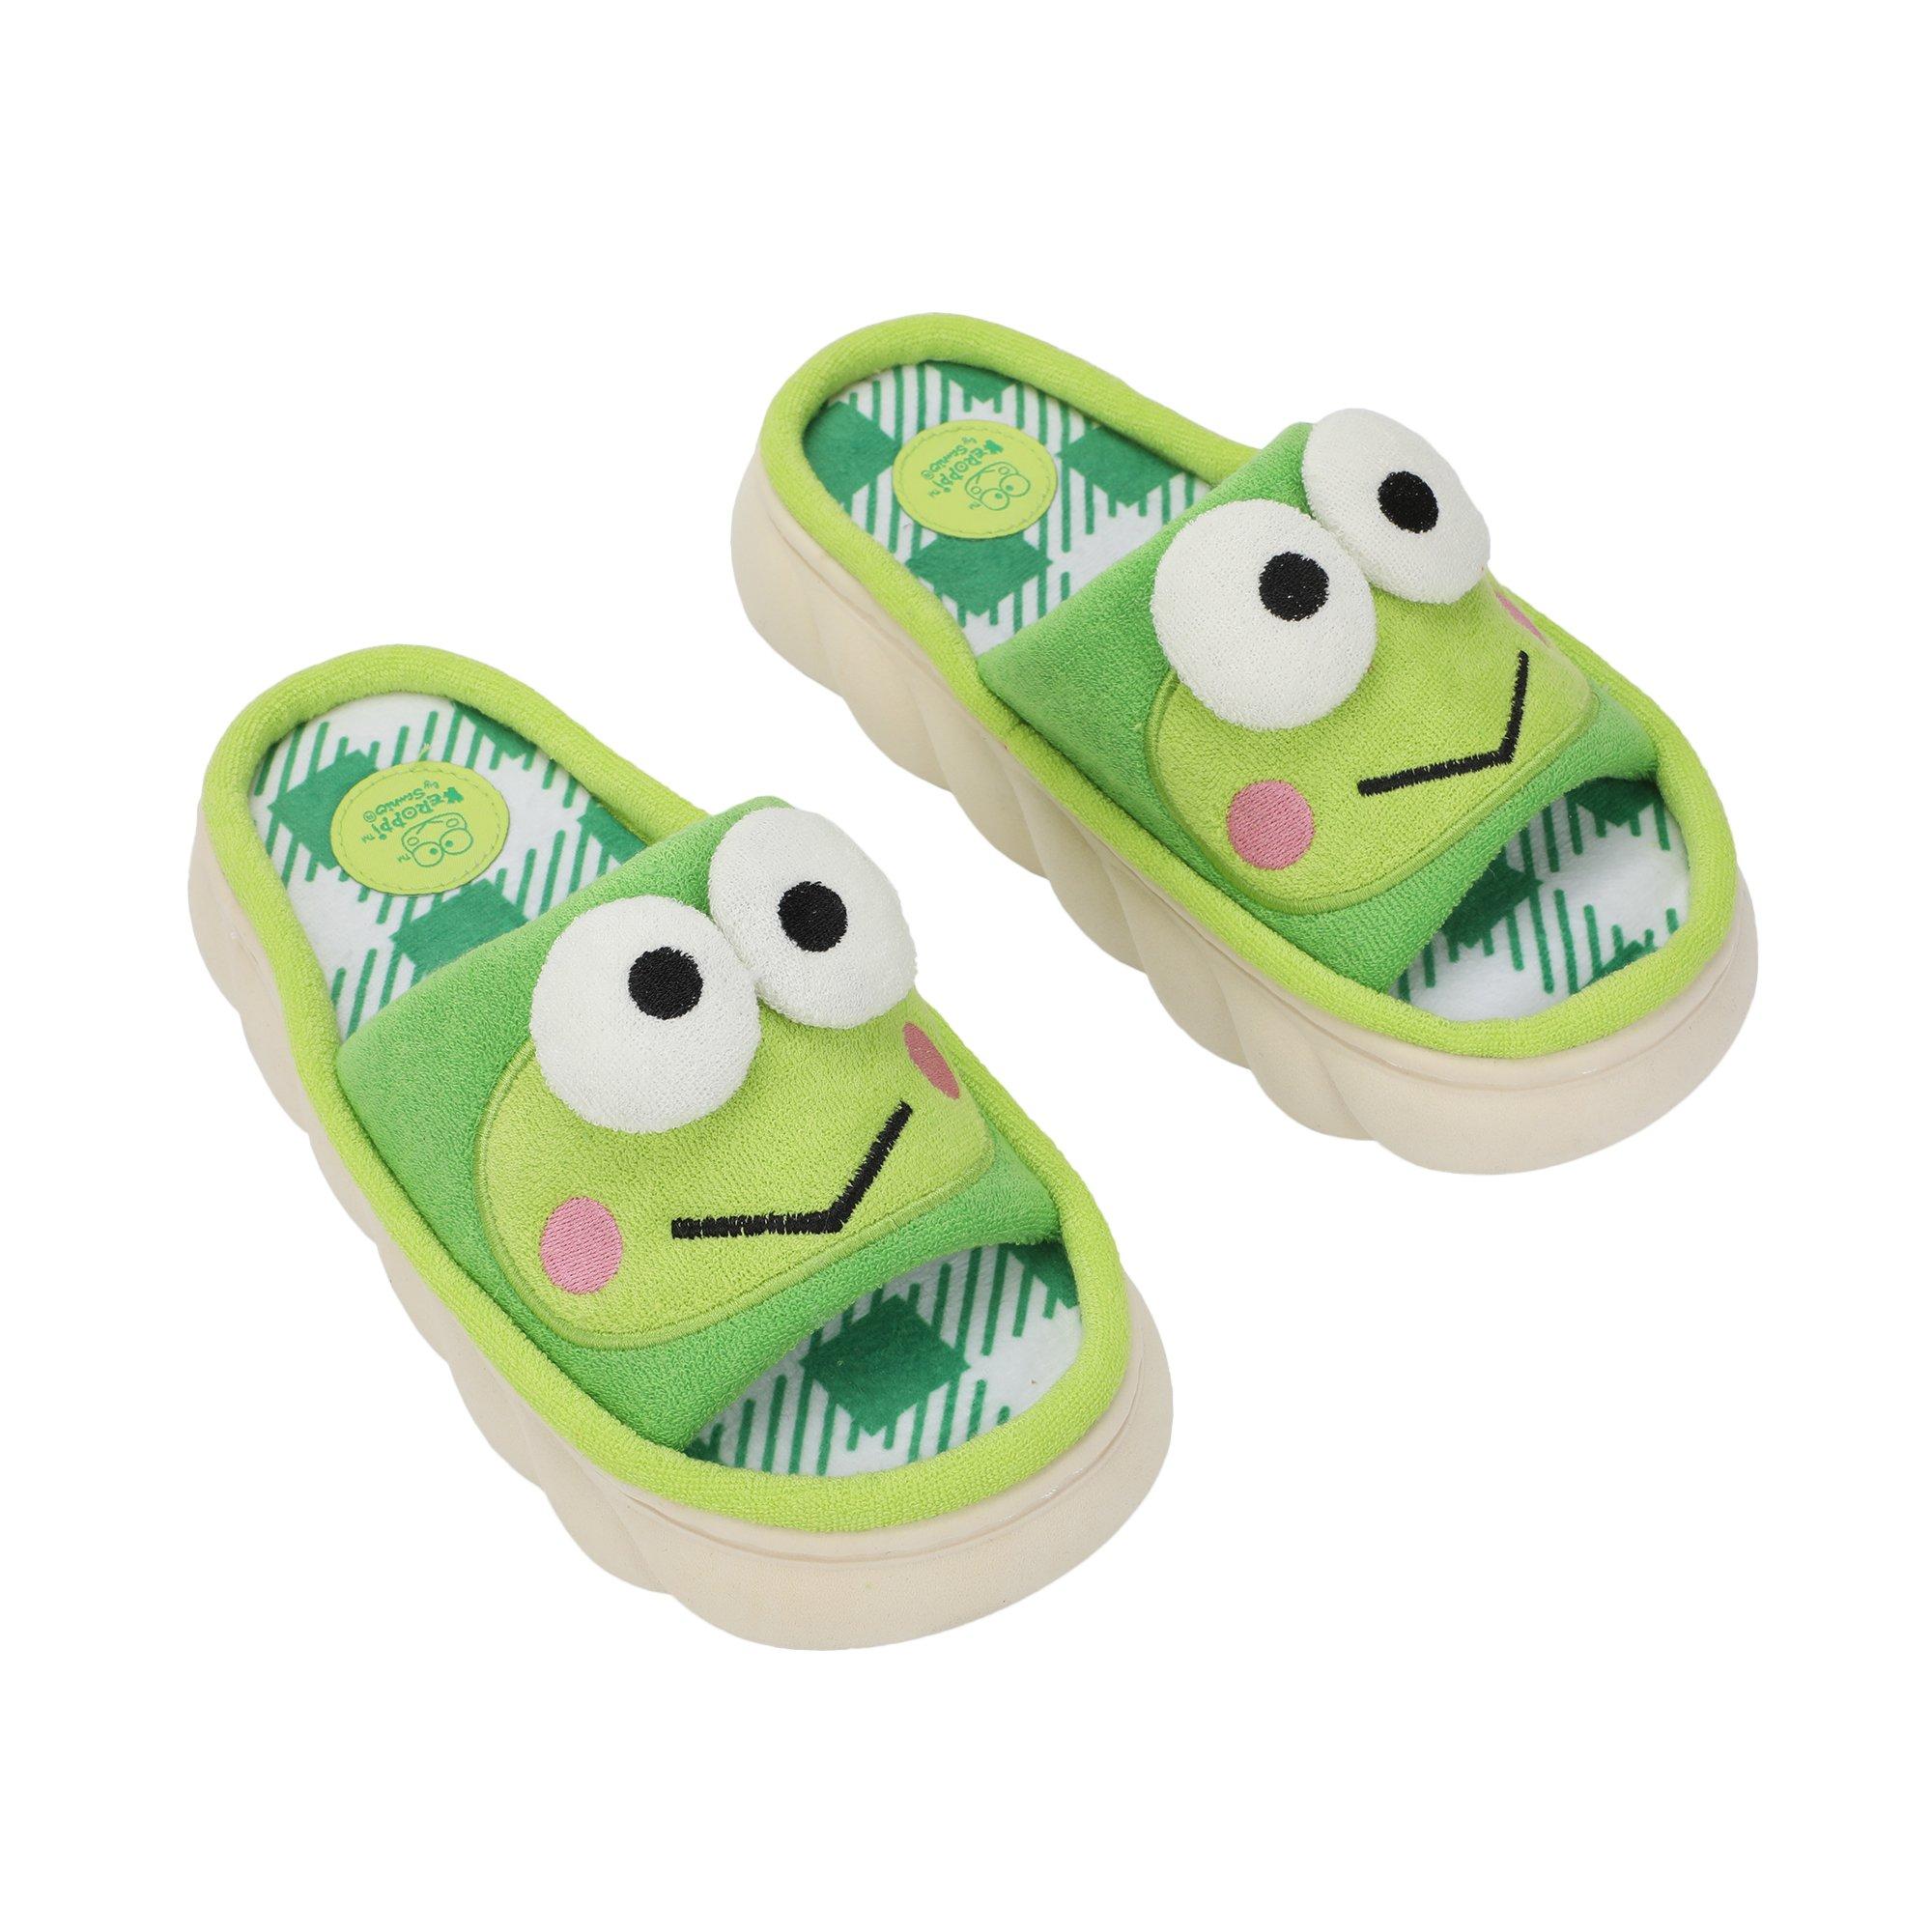 Keroppi 3D Character Face Art Women's Green and White Plaid Open-Toed Slide Slippers, Size: Small, Bioworld Merchandising